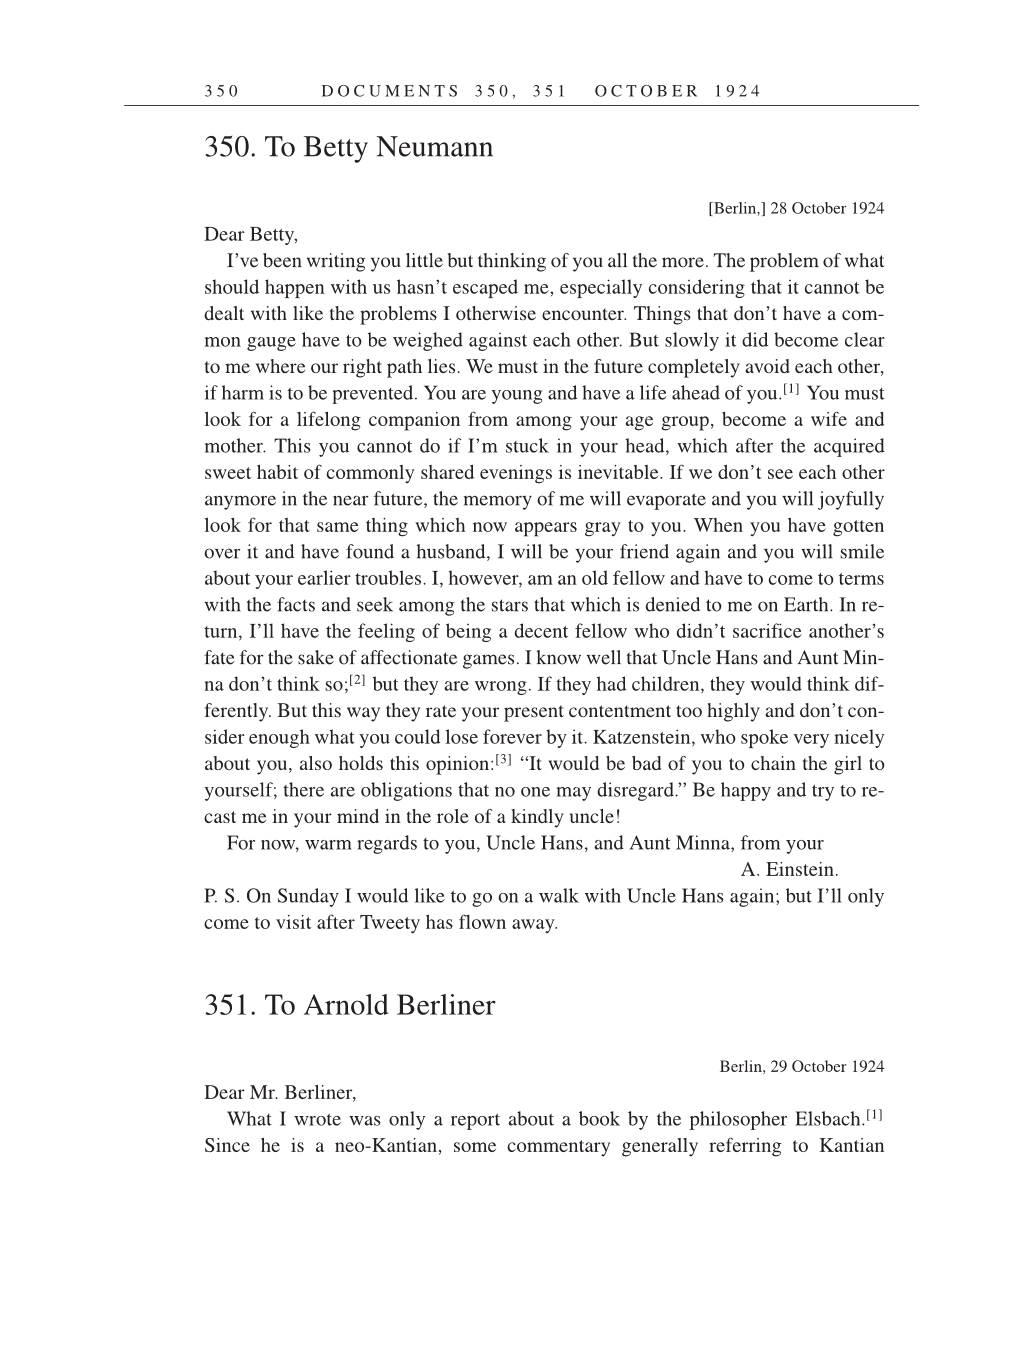 Volume 14: The Berlin Years: Writings & Correspondence, April 1923-May 1925 (English Translation Supplement) page 350